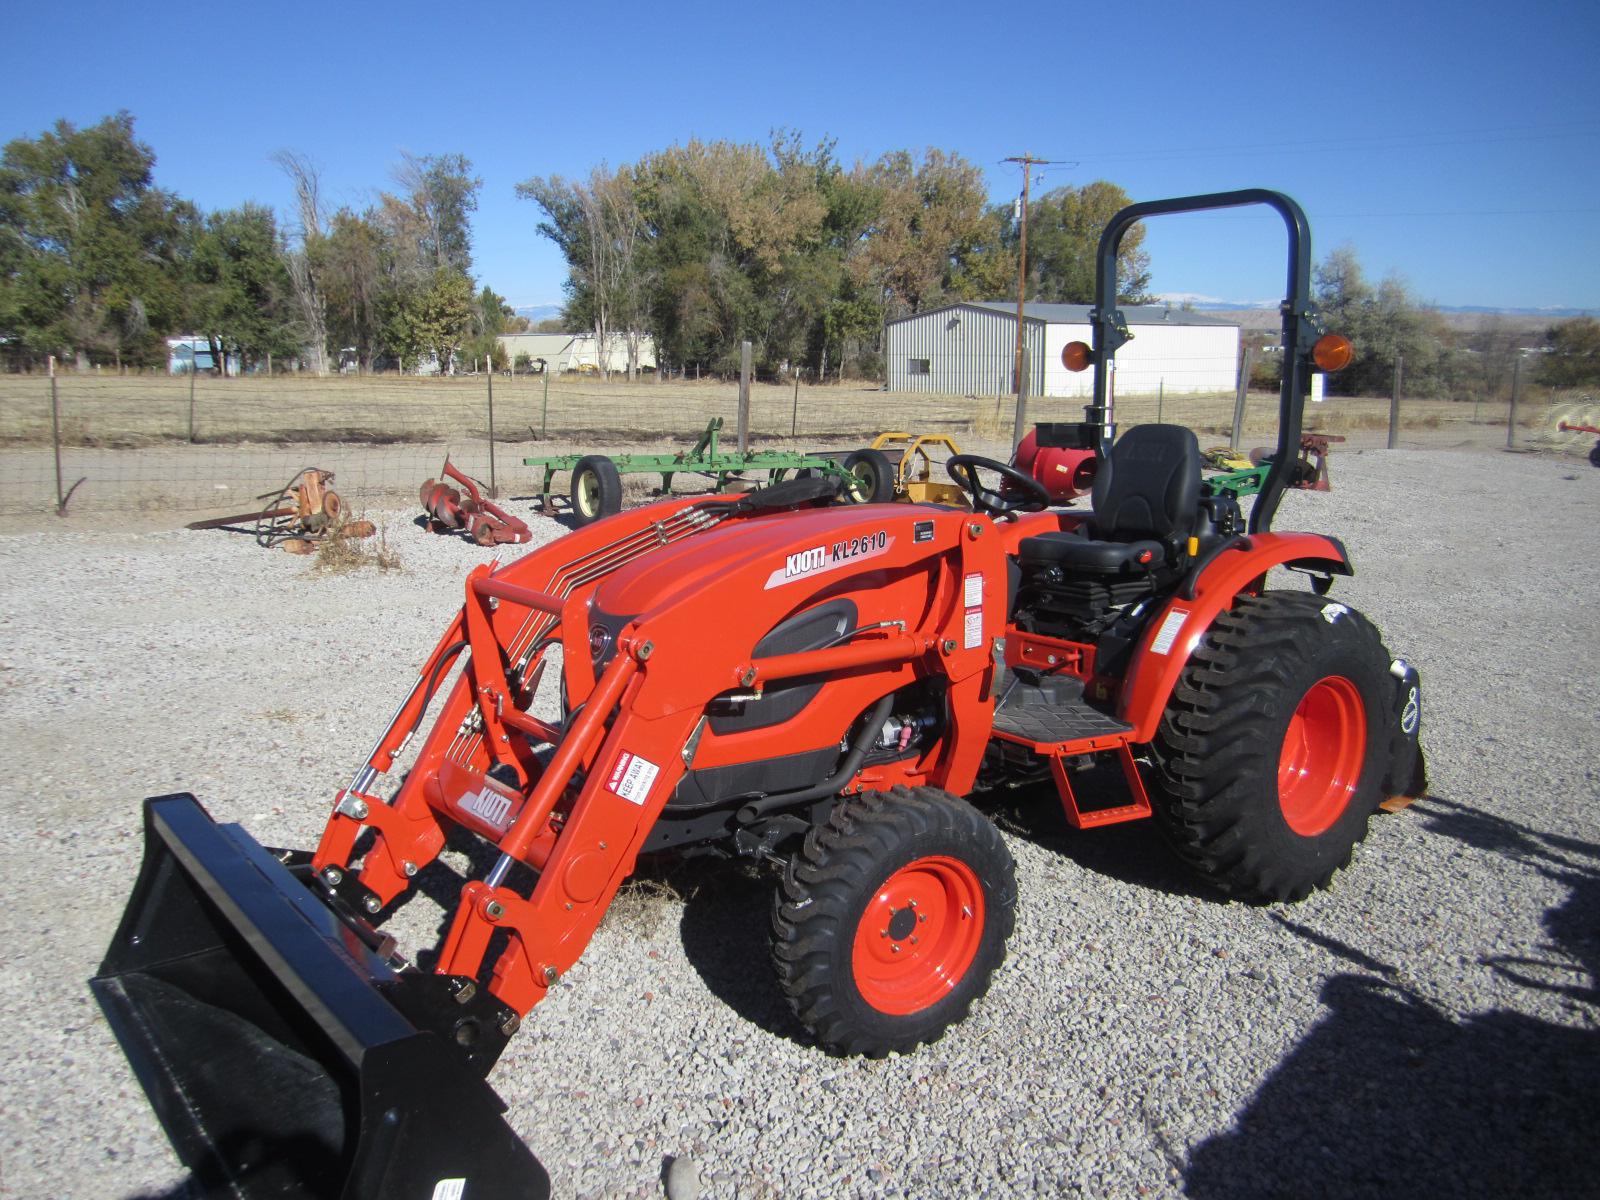 Kioti Ck2610hb For Sale In Worland Wy Tractor Guys Inc